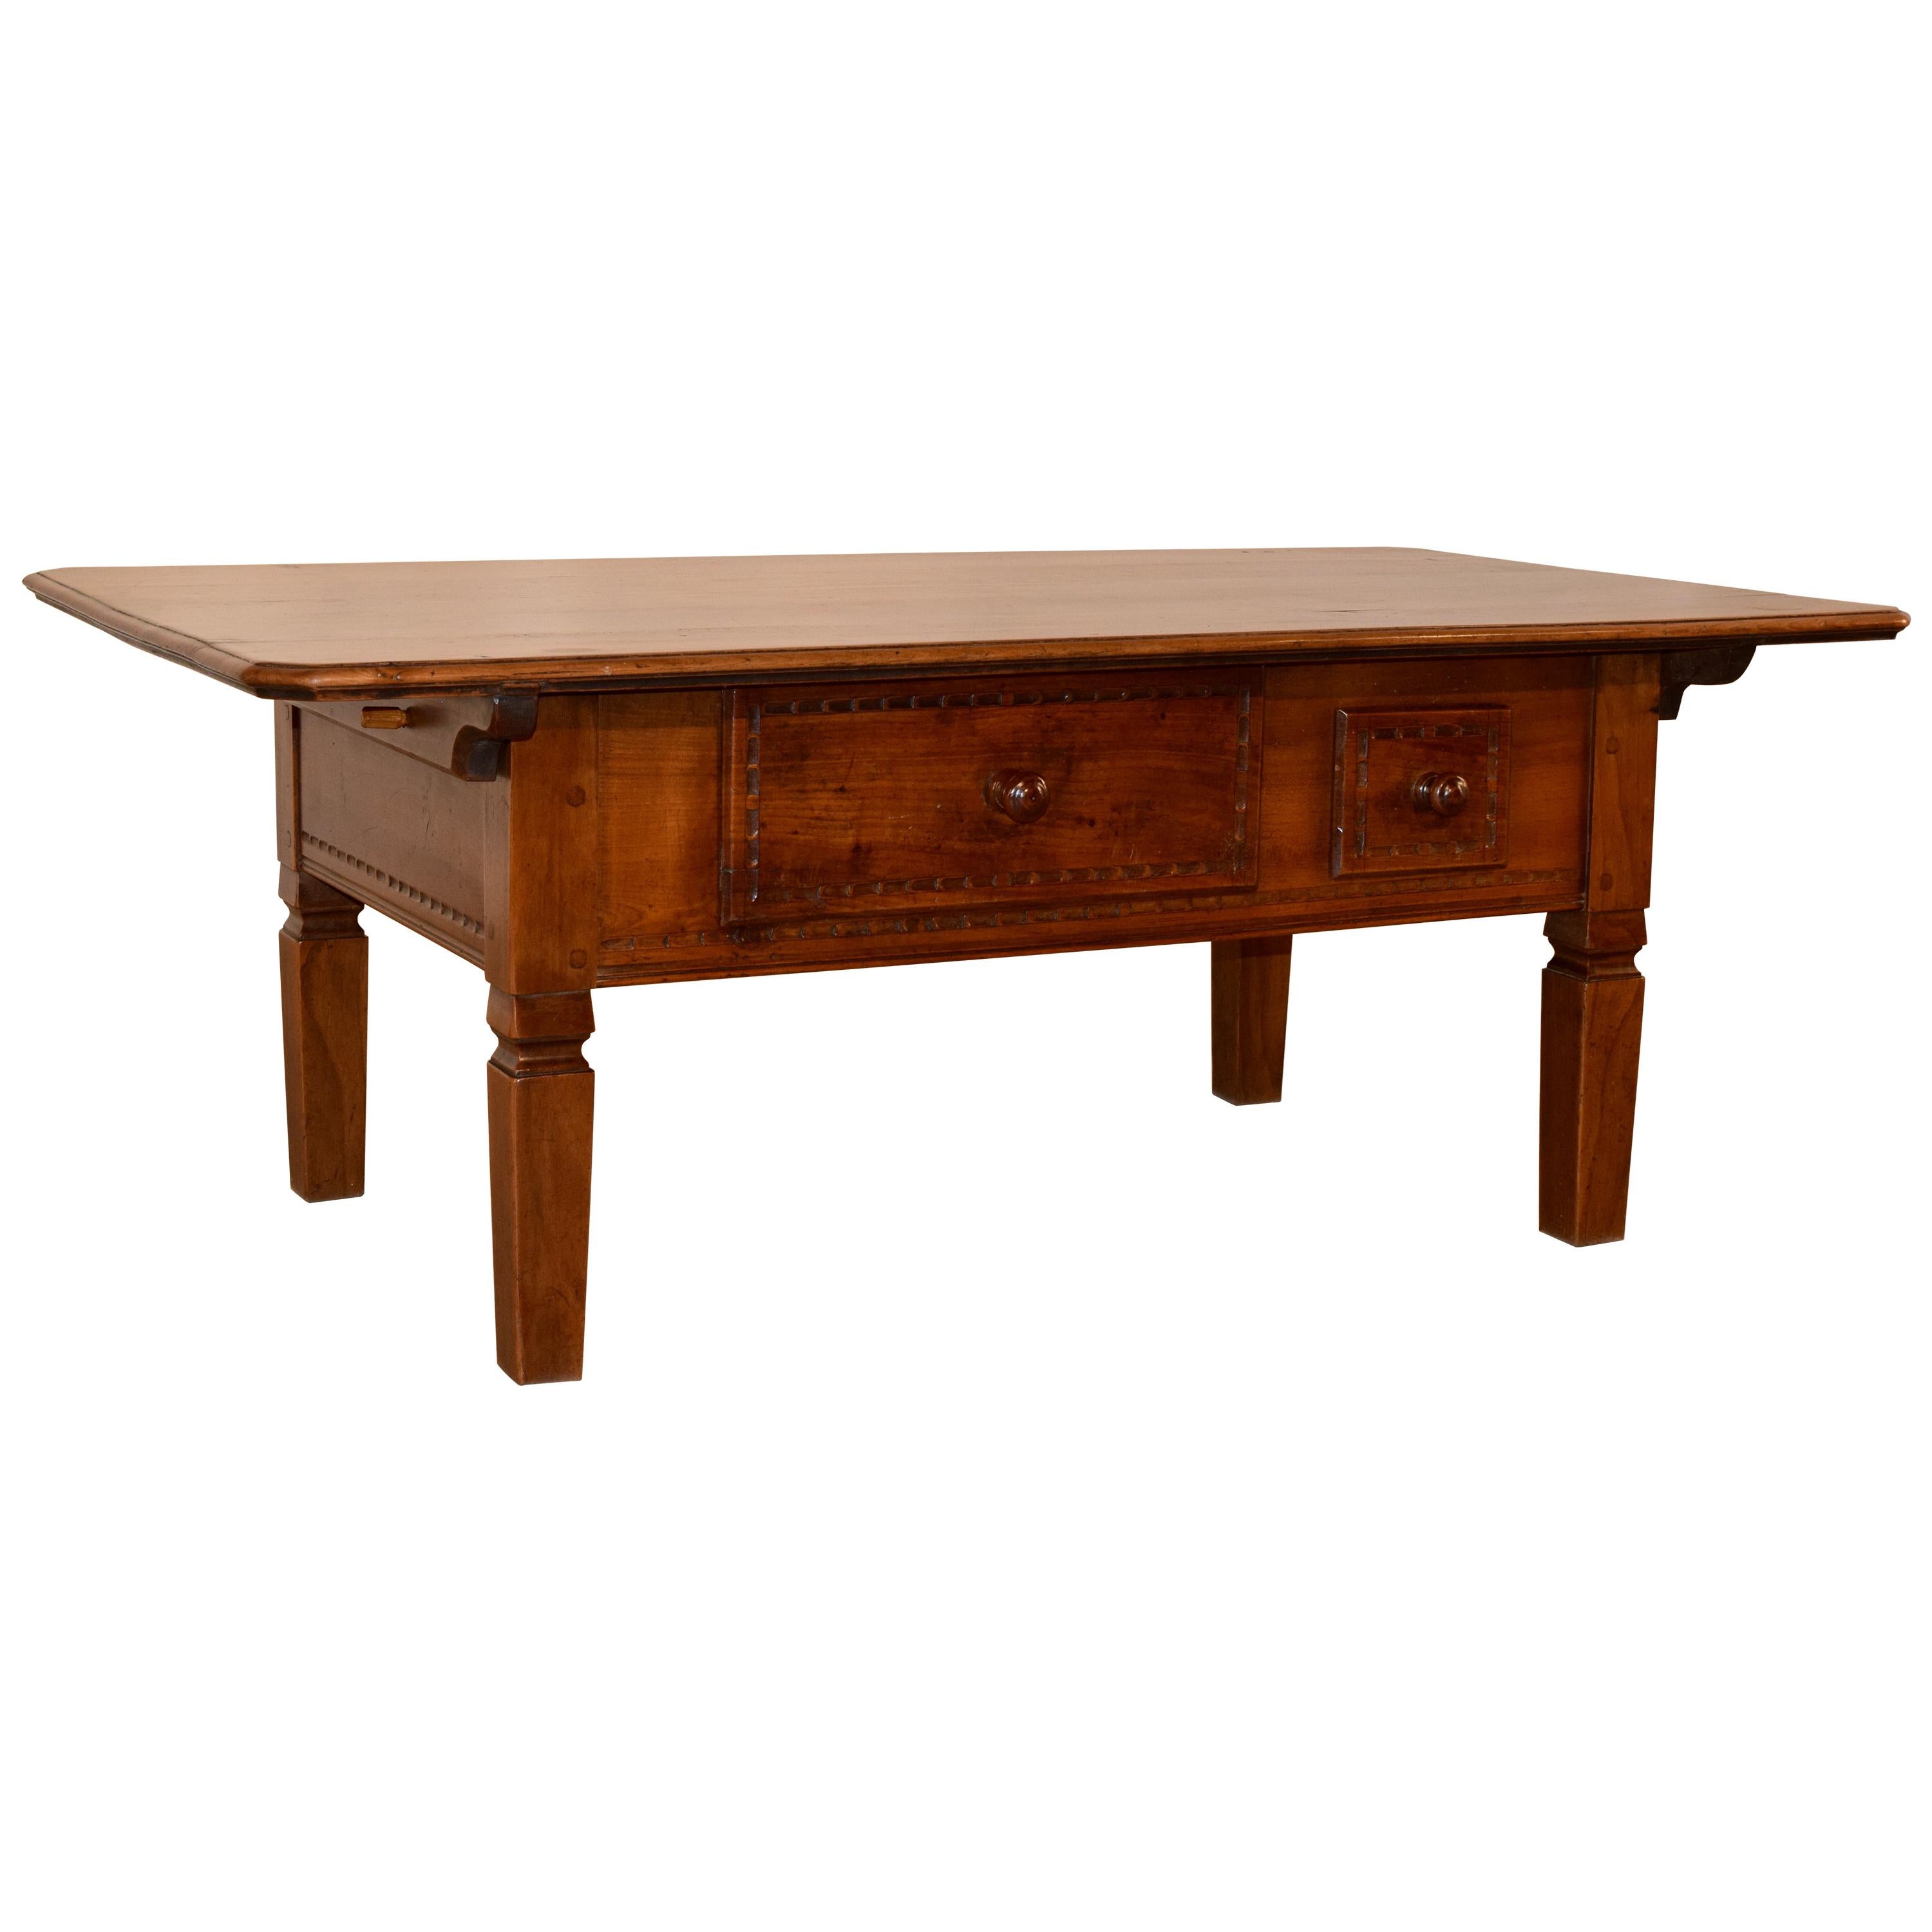 19th Century Swiss Coffee Table with Two Drawers